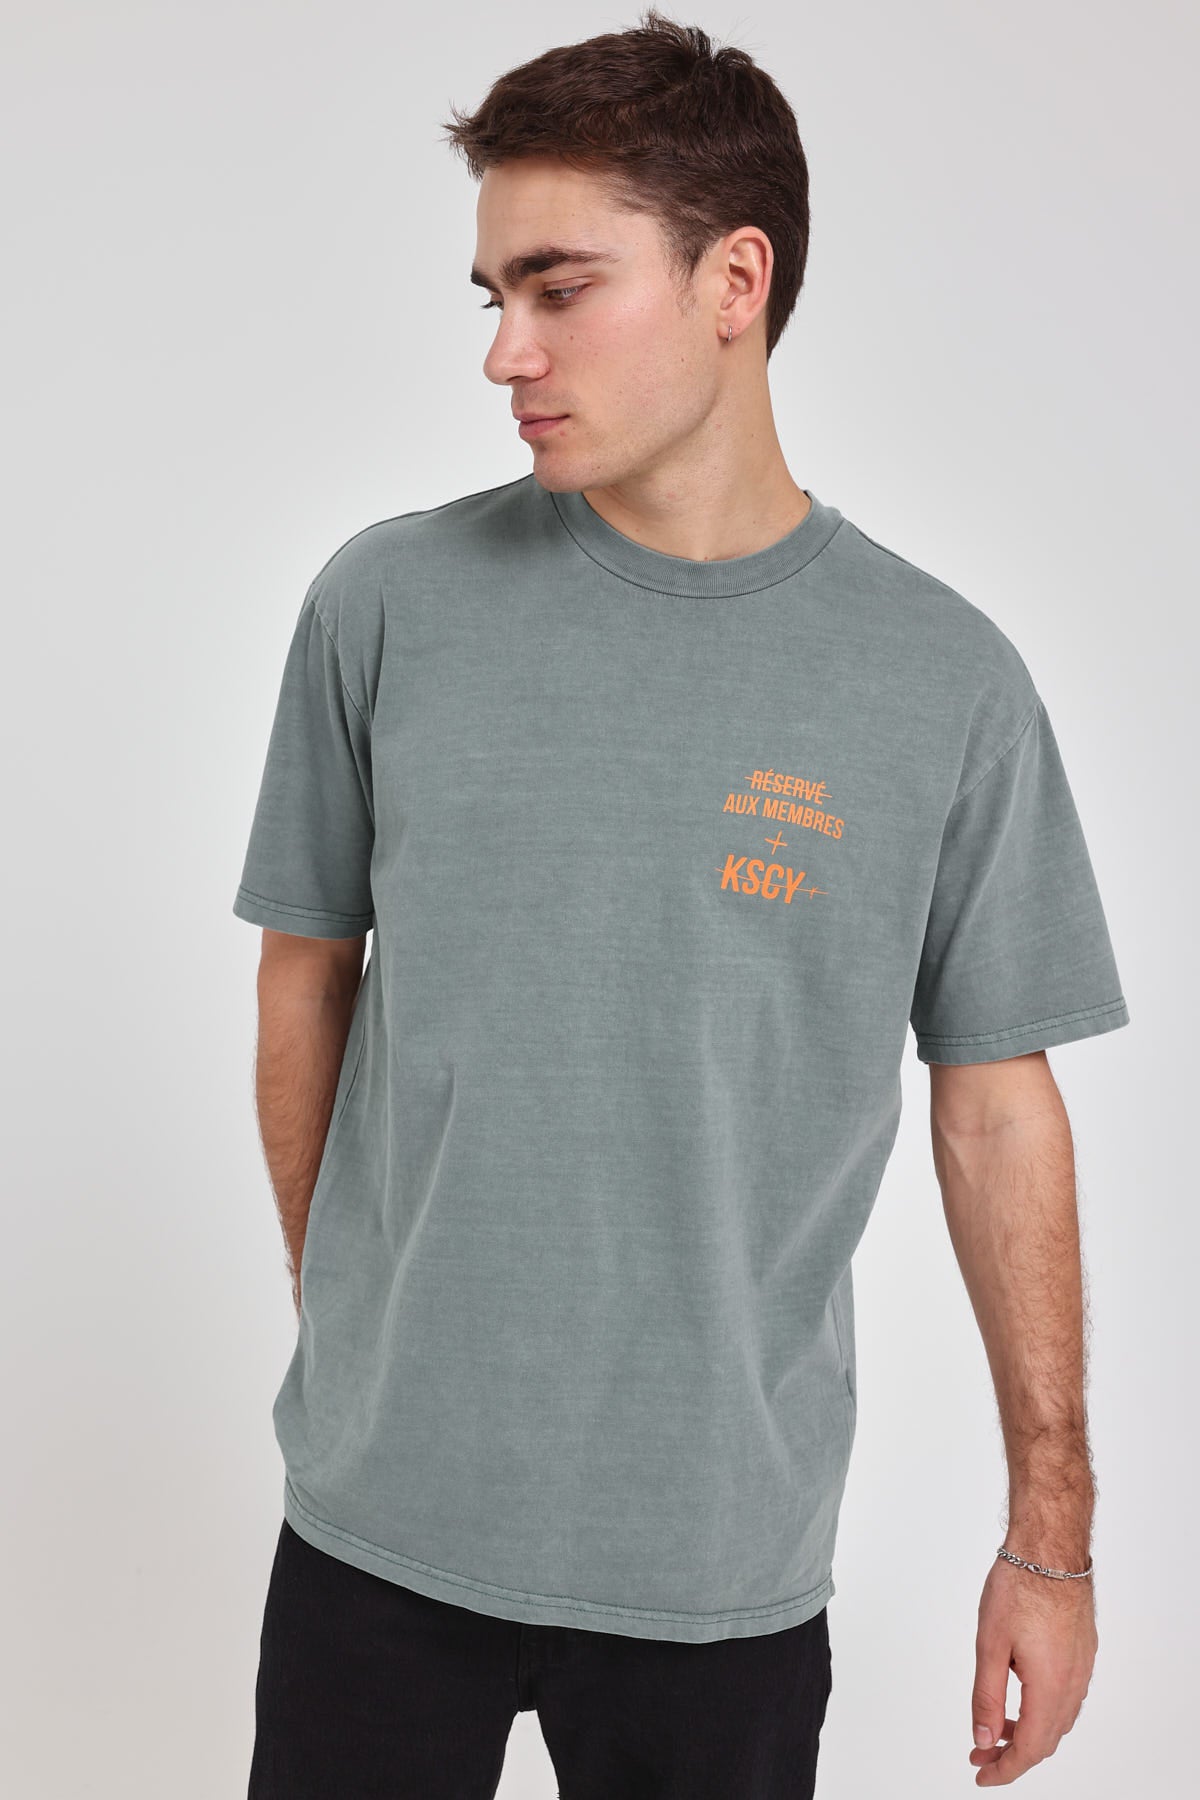 Kiss Chacey Battalion Box Fit Tee Pigment Silver Pine